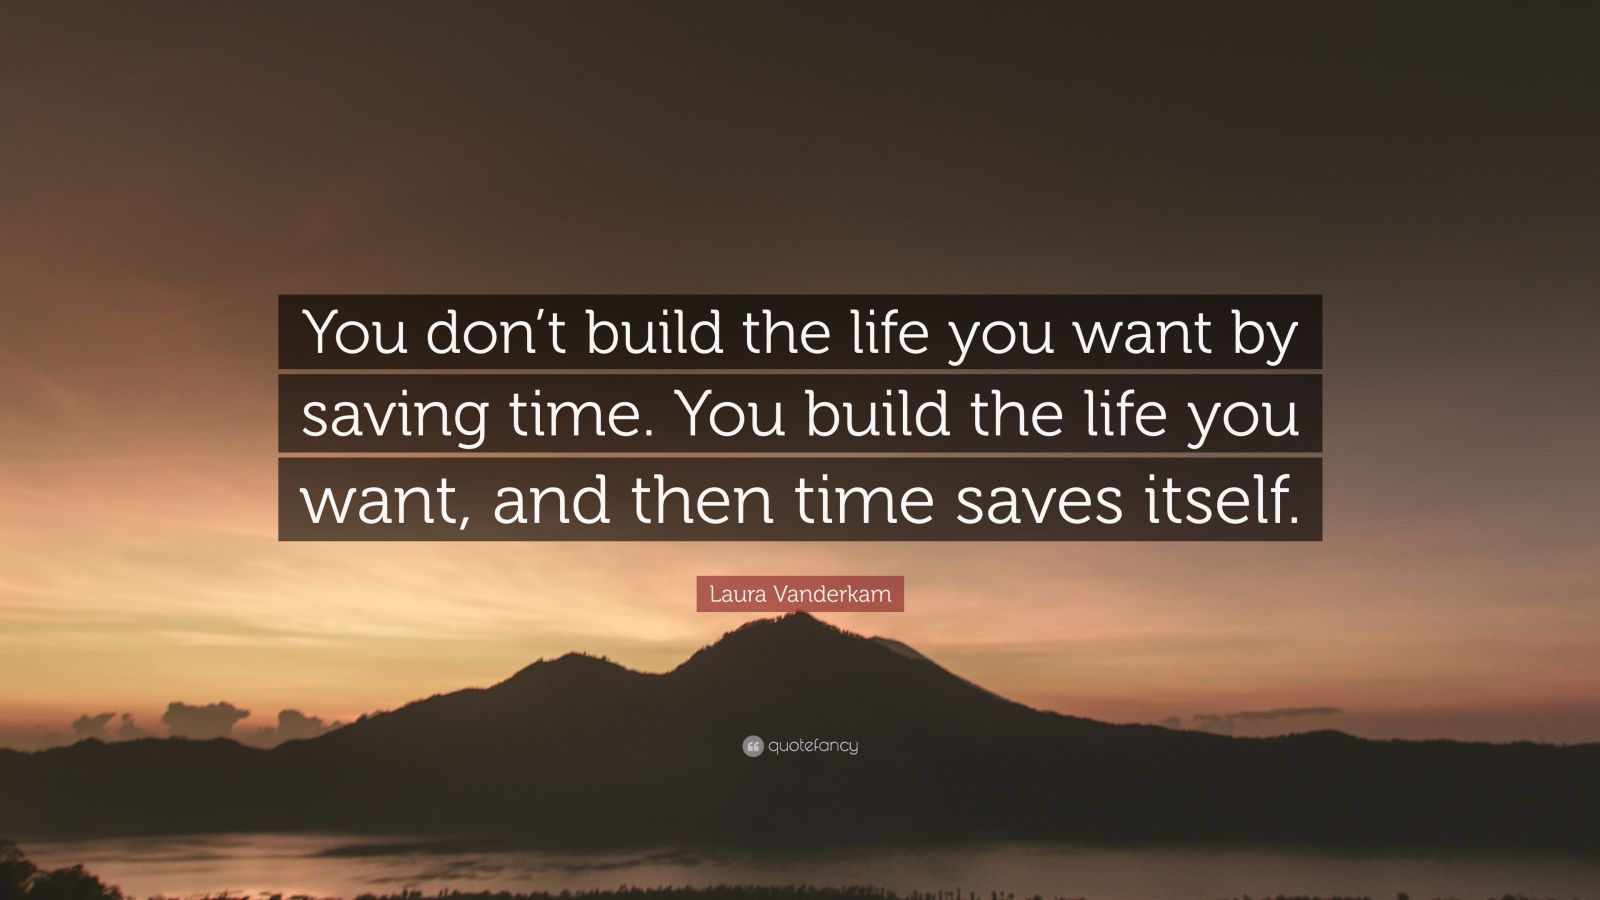 Laura Vanderkam Quote: “You don't build the life you want by saving time.  You build the life you want, and then time saves itself. Recognizing t”